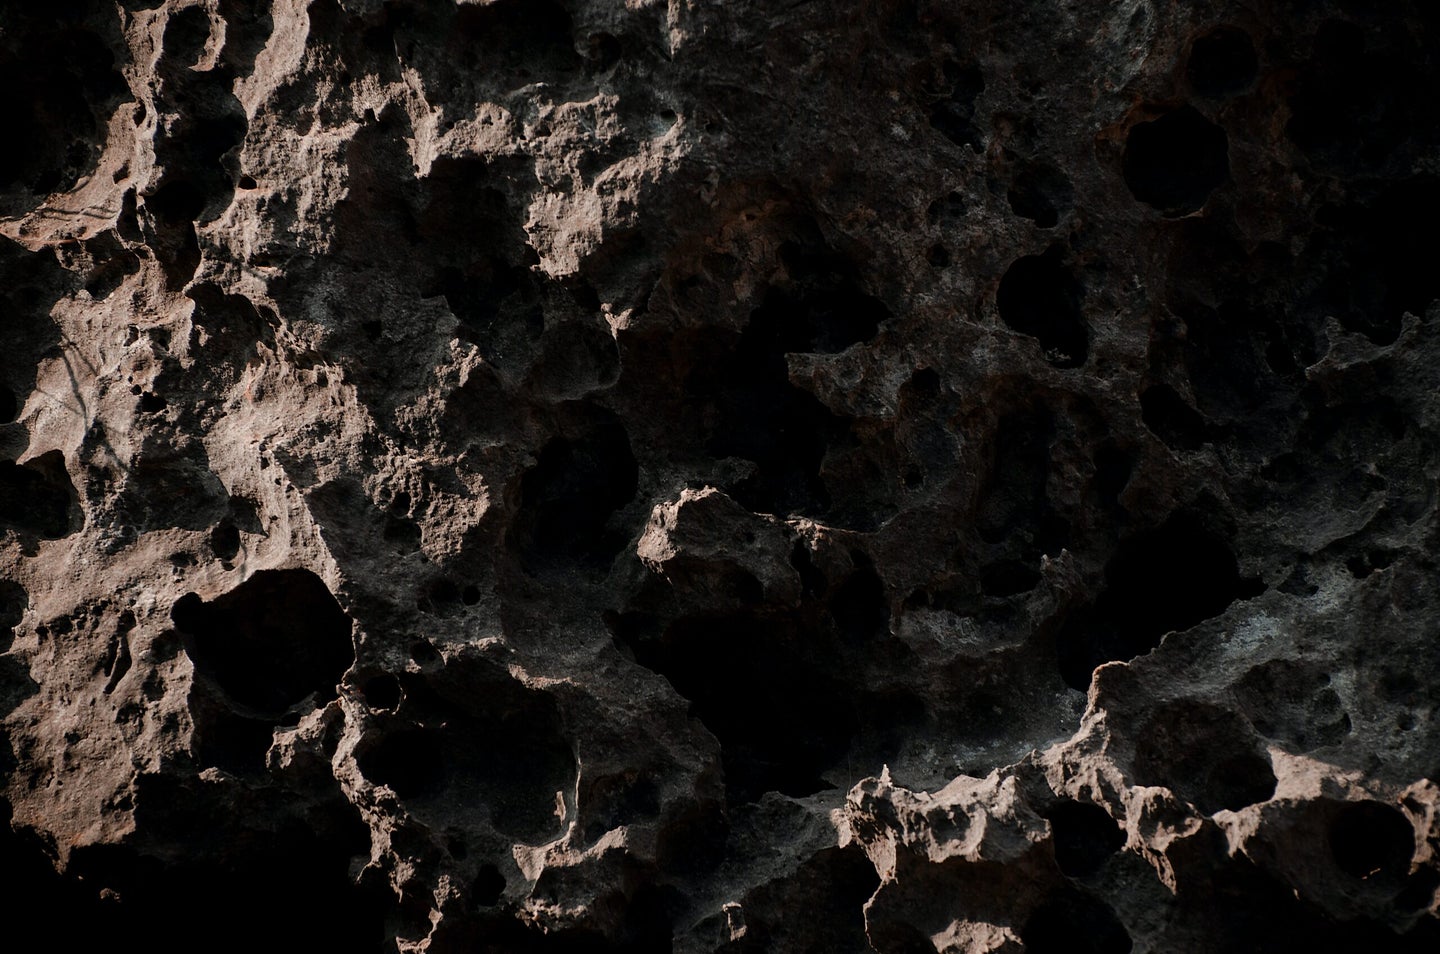 Asteroid surface.